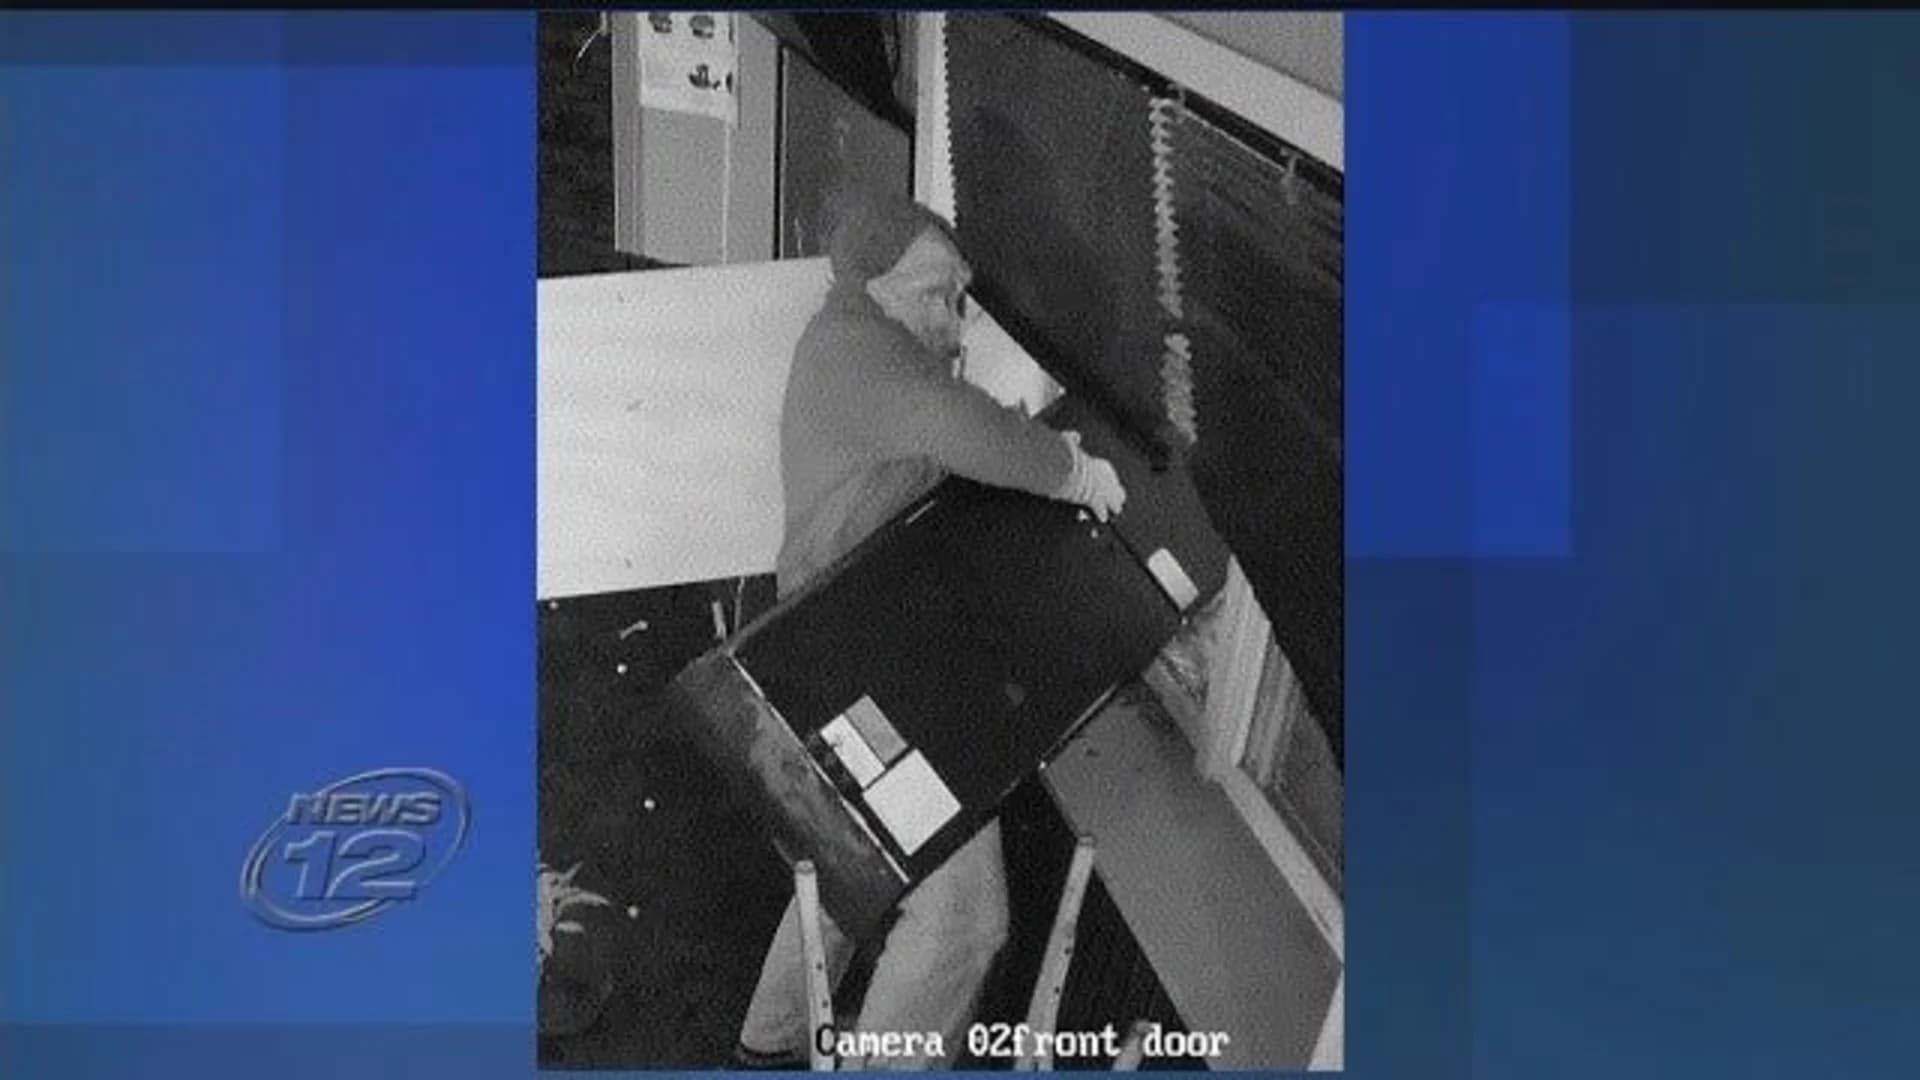 Police: Man stole restaurant’s wall-mounted jukebox